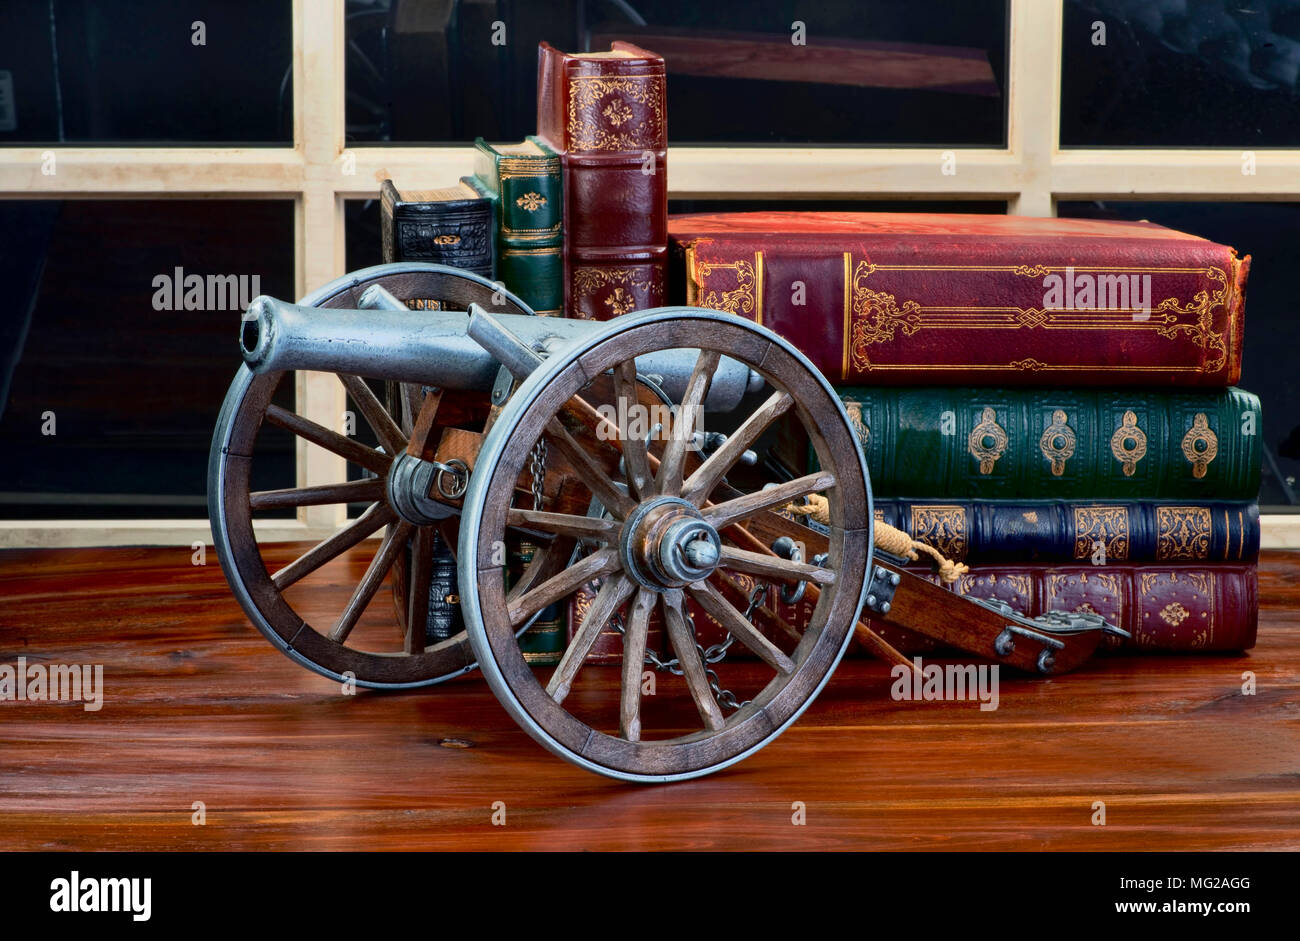 Old American cannon model with antique books in background. Stock Photo